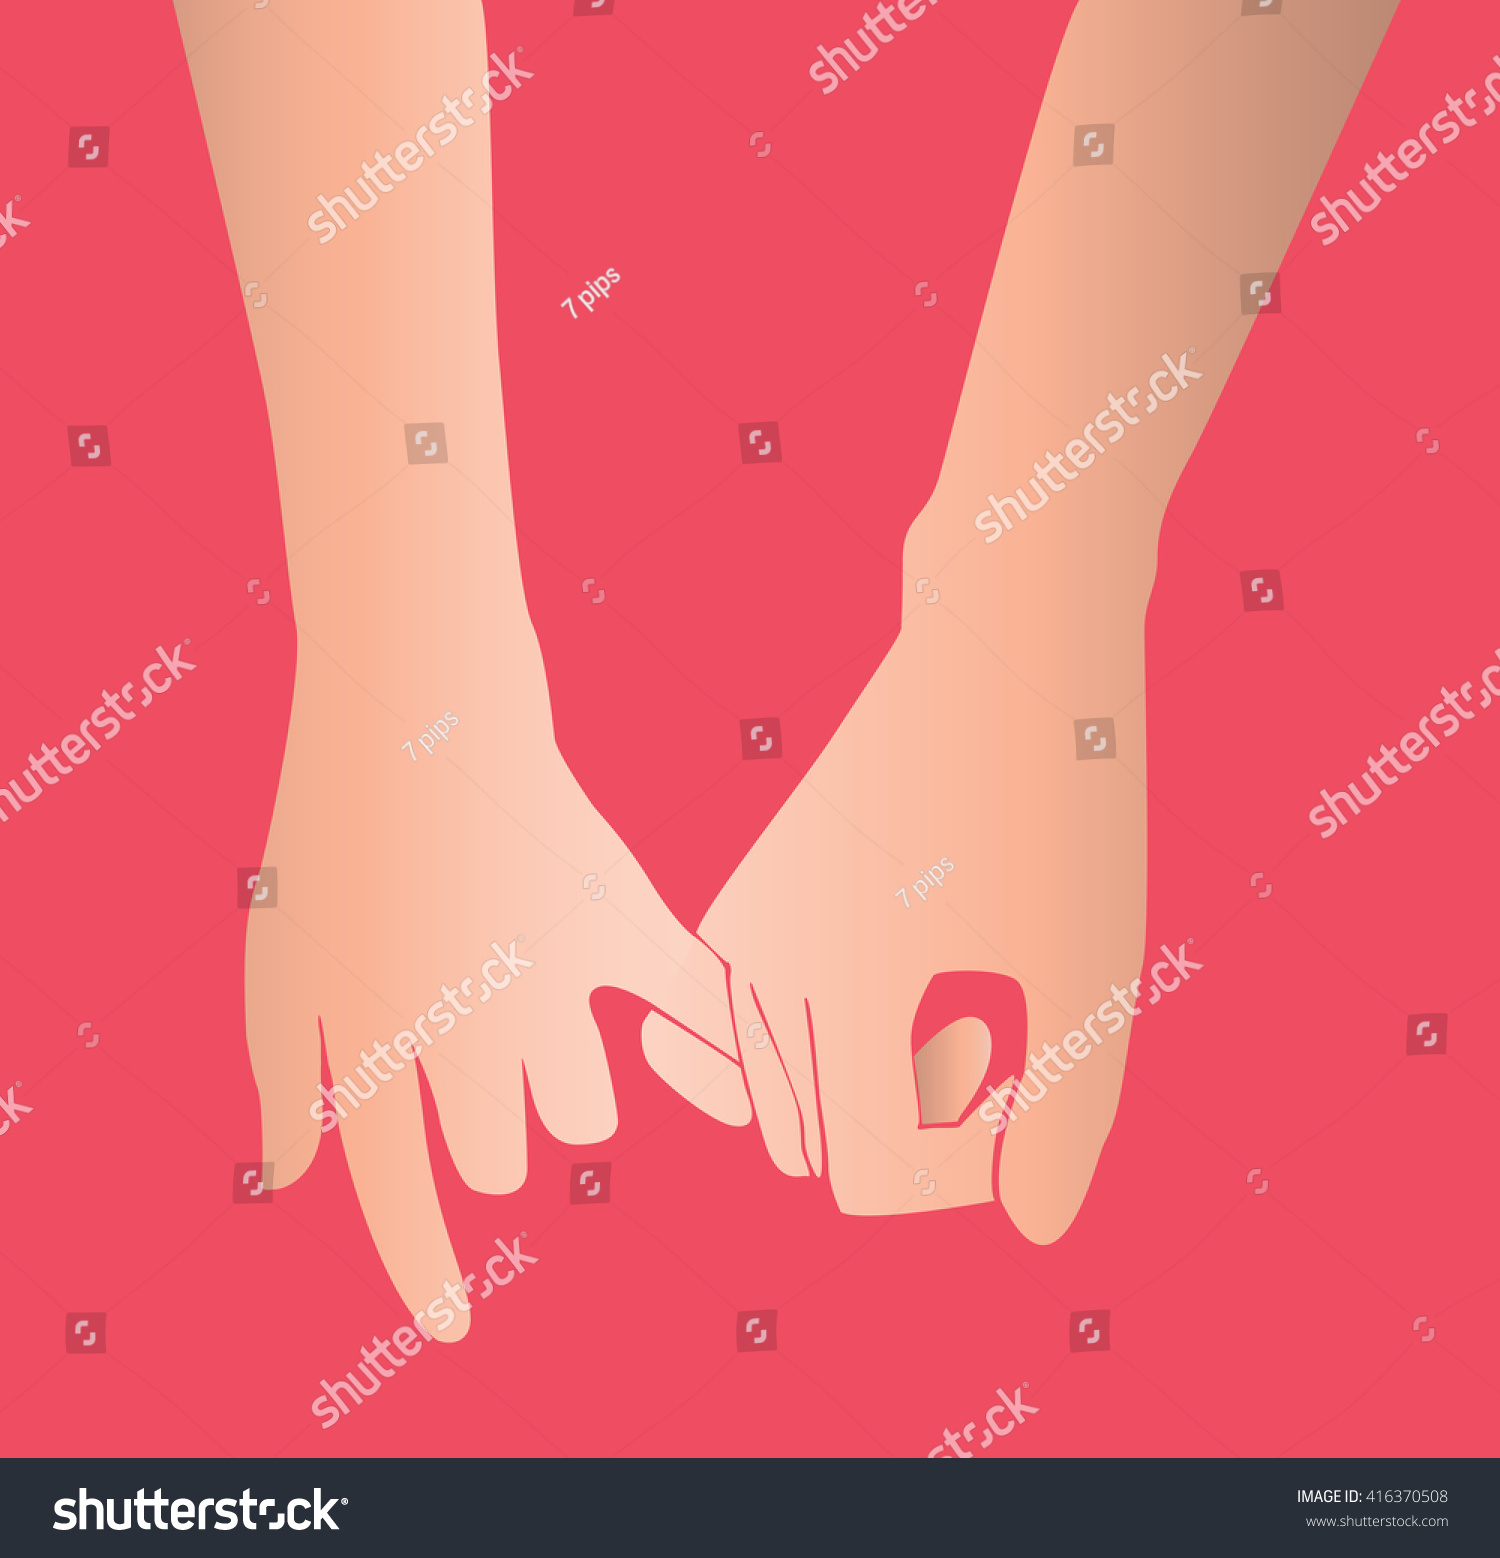 Pinky Promise Hand Holding Pink Background Stock Vector 416370508 Shutterstock 